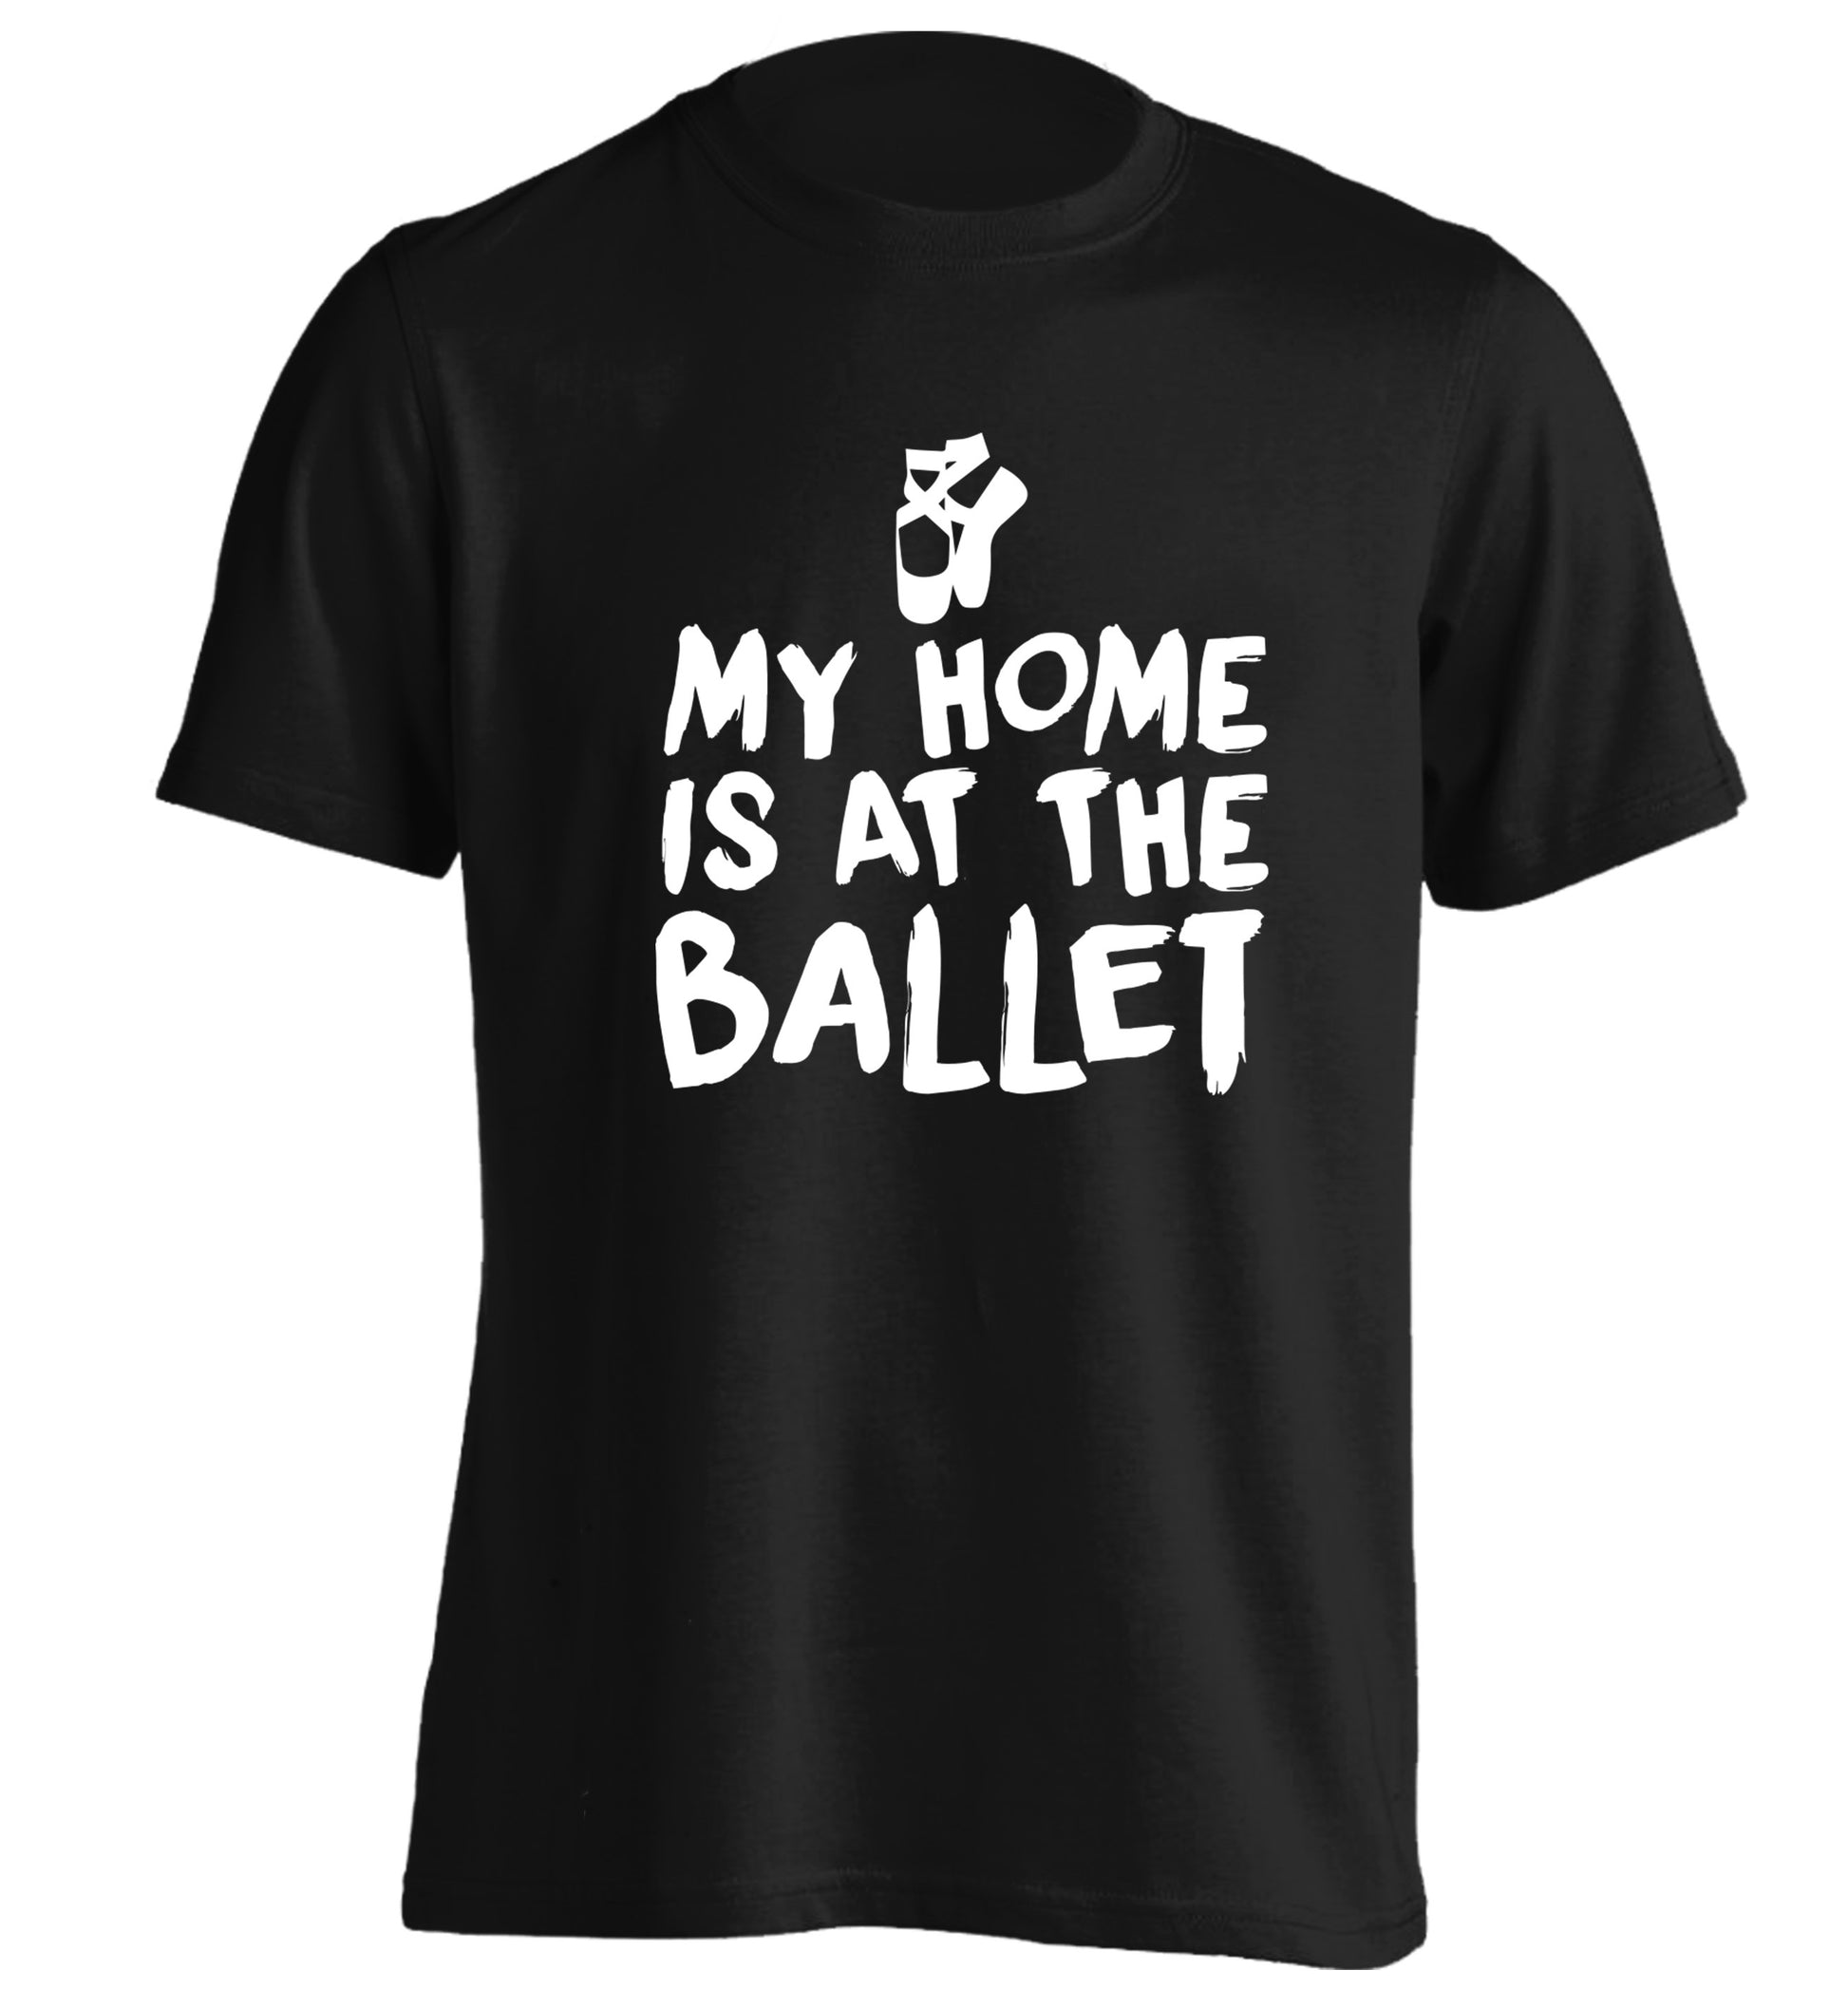 My home is at the dance studio adults unisex black Tshirt 2XL